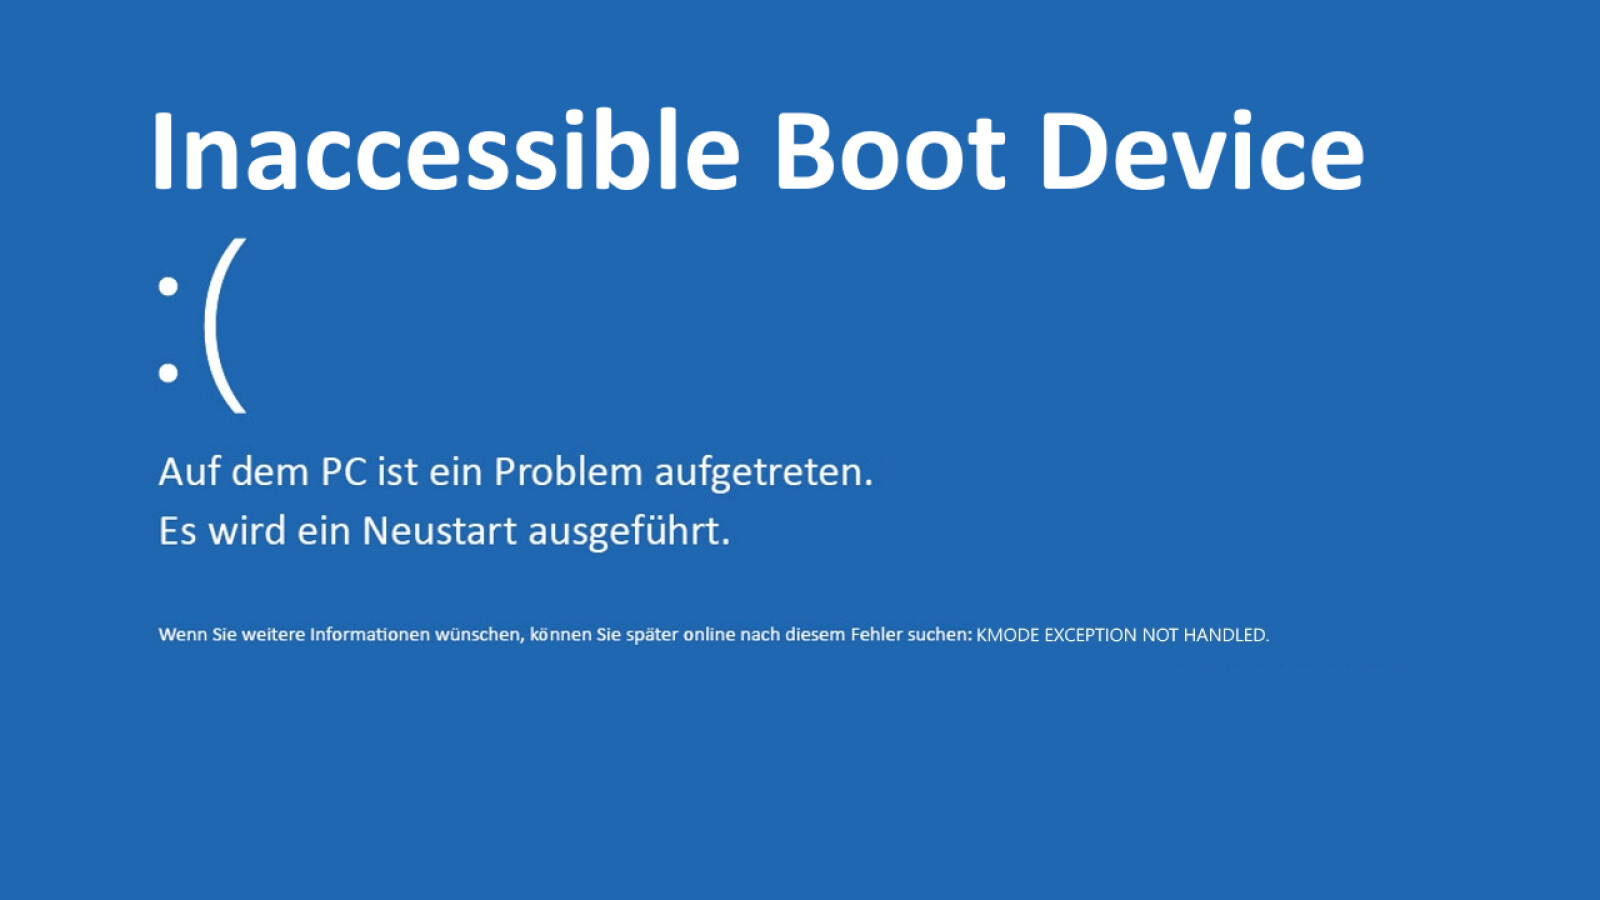 inaccessible boot device คือ key